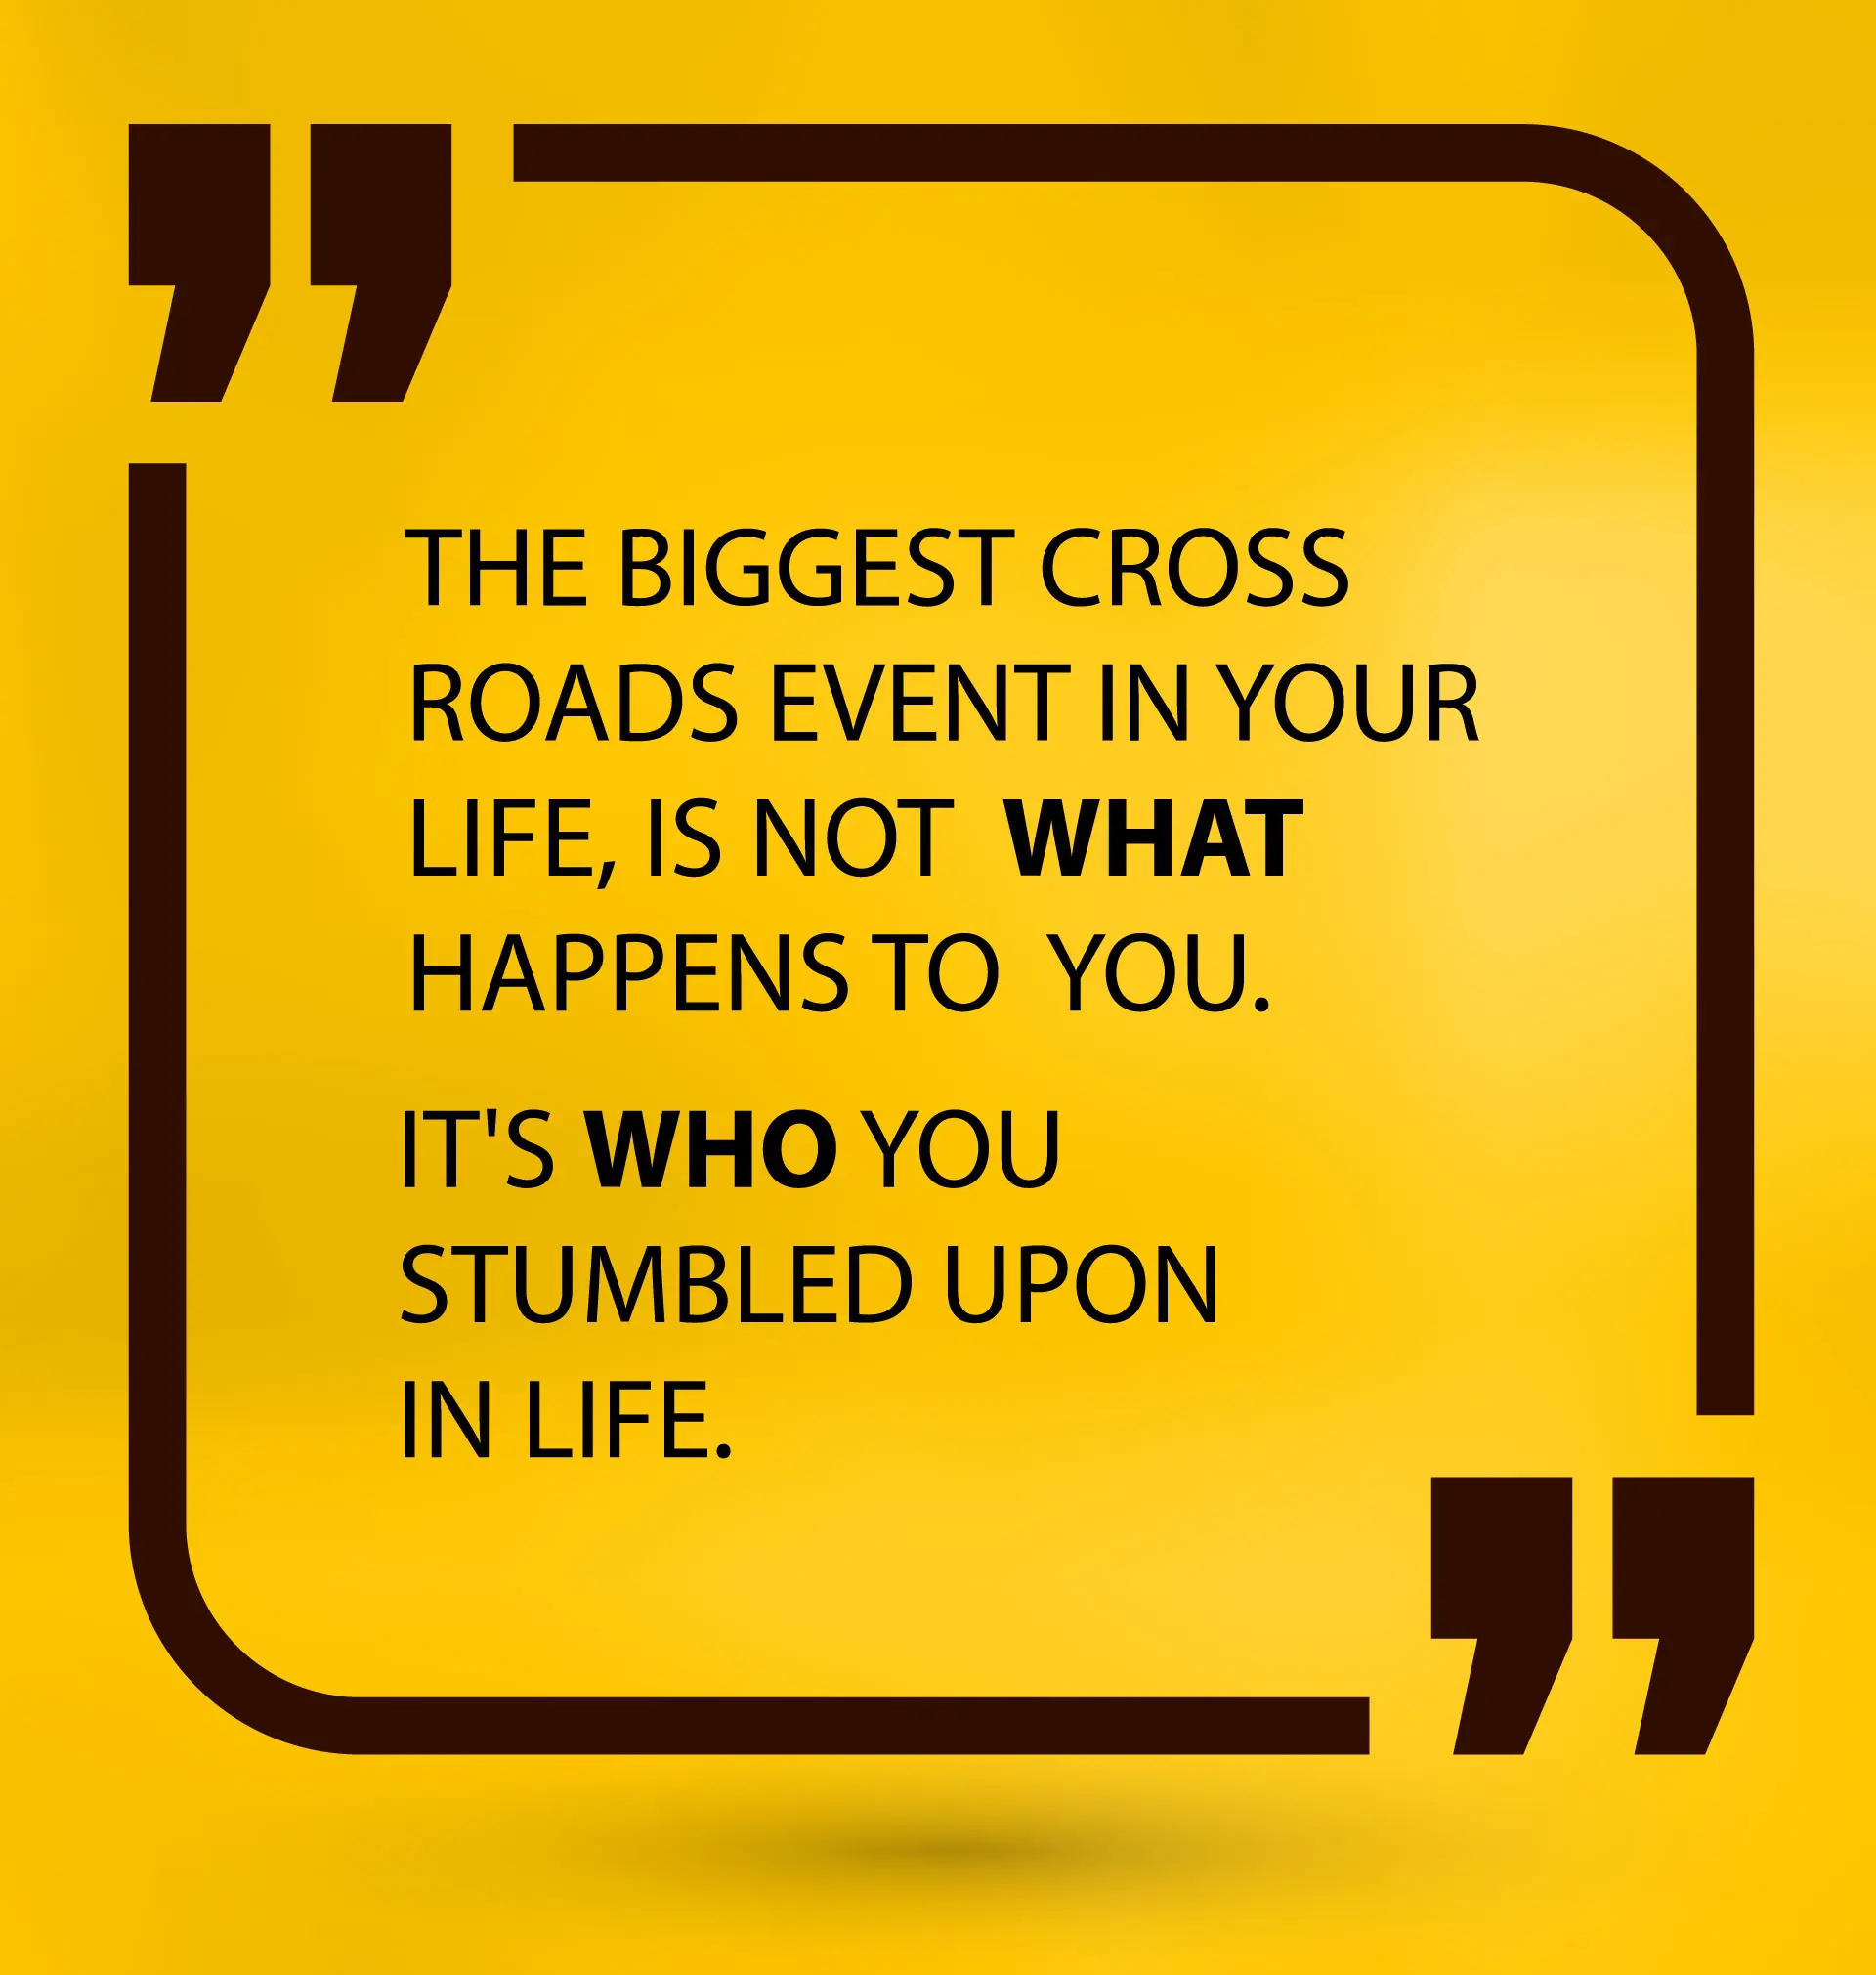 The Biggest Cross Roads Event in Your Life, Is Not What Happens to You. It's Who You Stumbled Upon in Life.